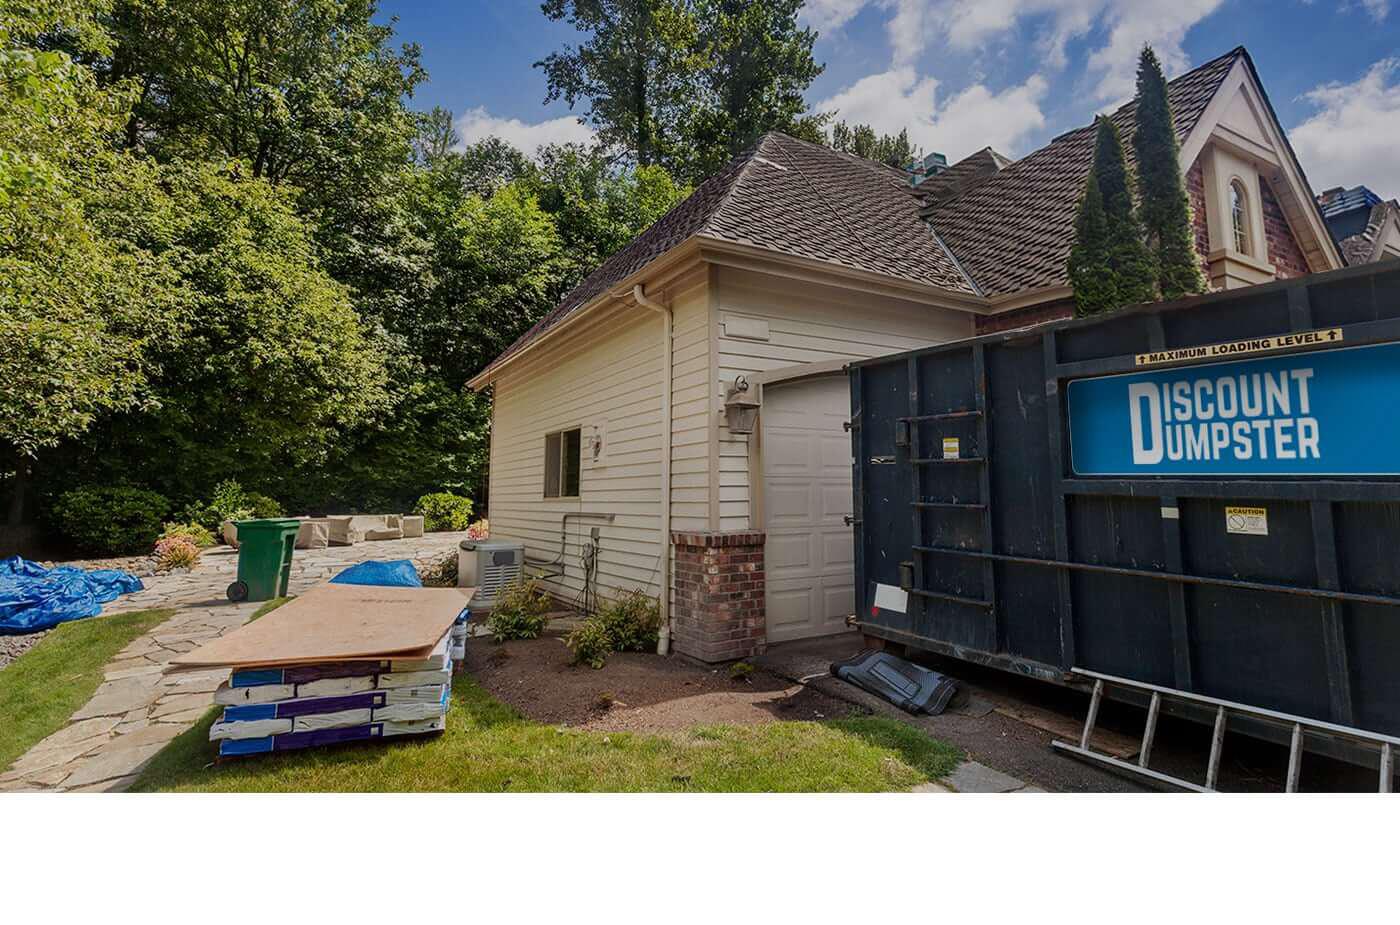 Discount dumpster is there for all your waste management needs for your next home improvement in Chicago il